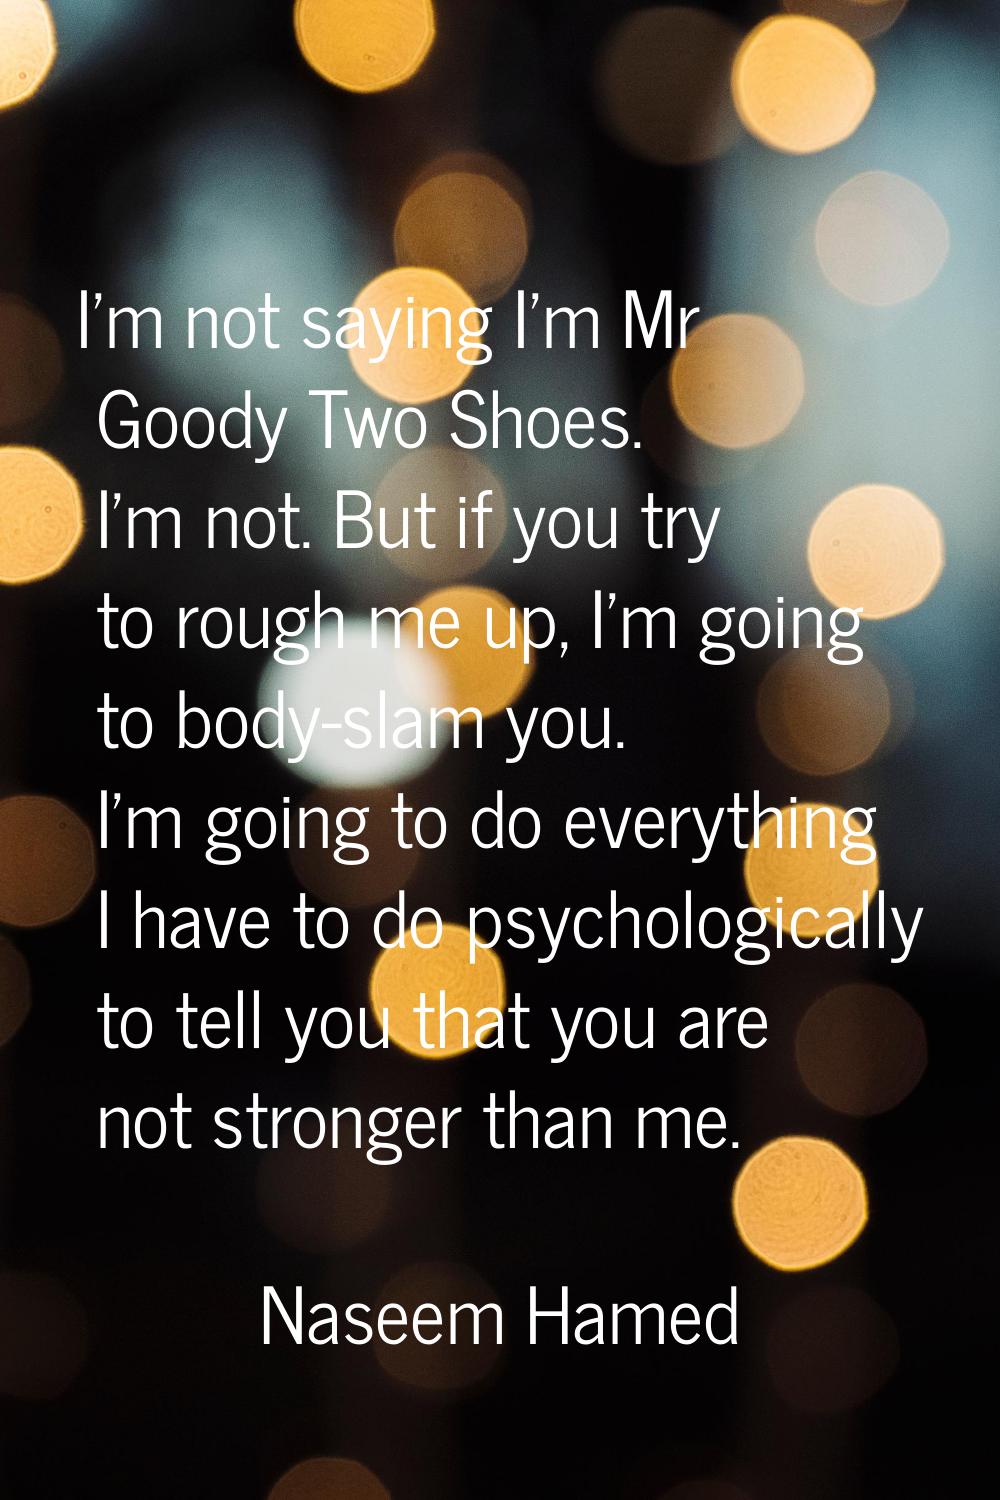 I'm not saying I'm Mr Goody Two Shoes. I'm not. But if you try to rough me up, I'm going to body-sl